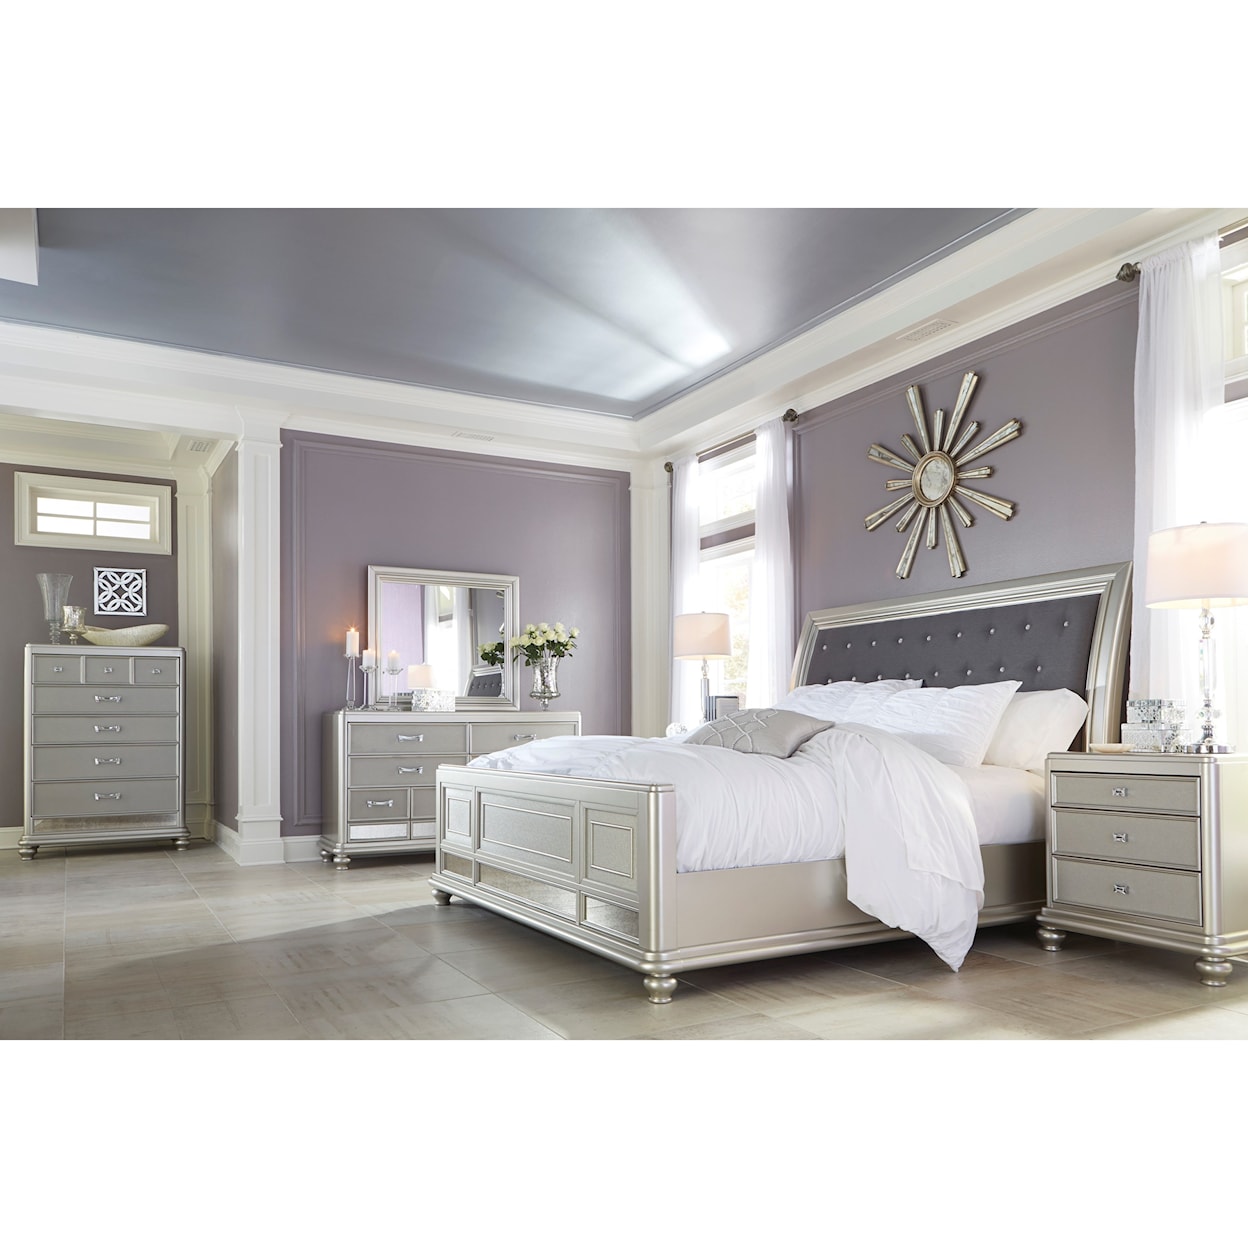 Signature Design by Ashley Coralayne Queen Bedroom Group